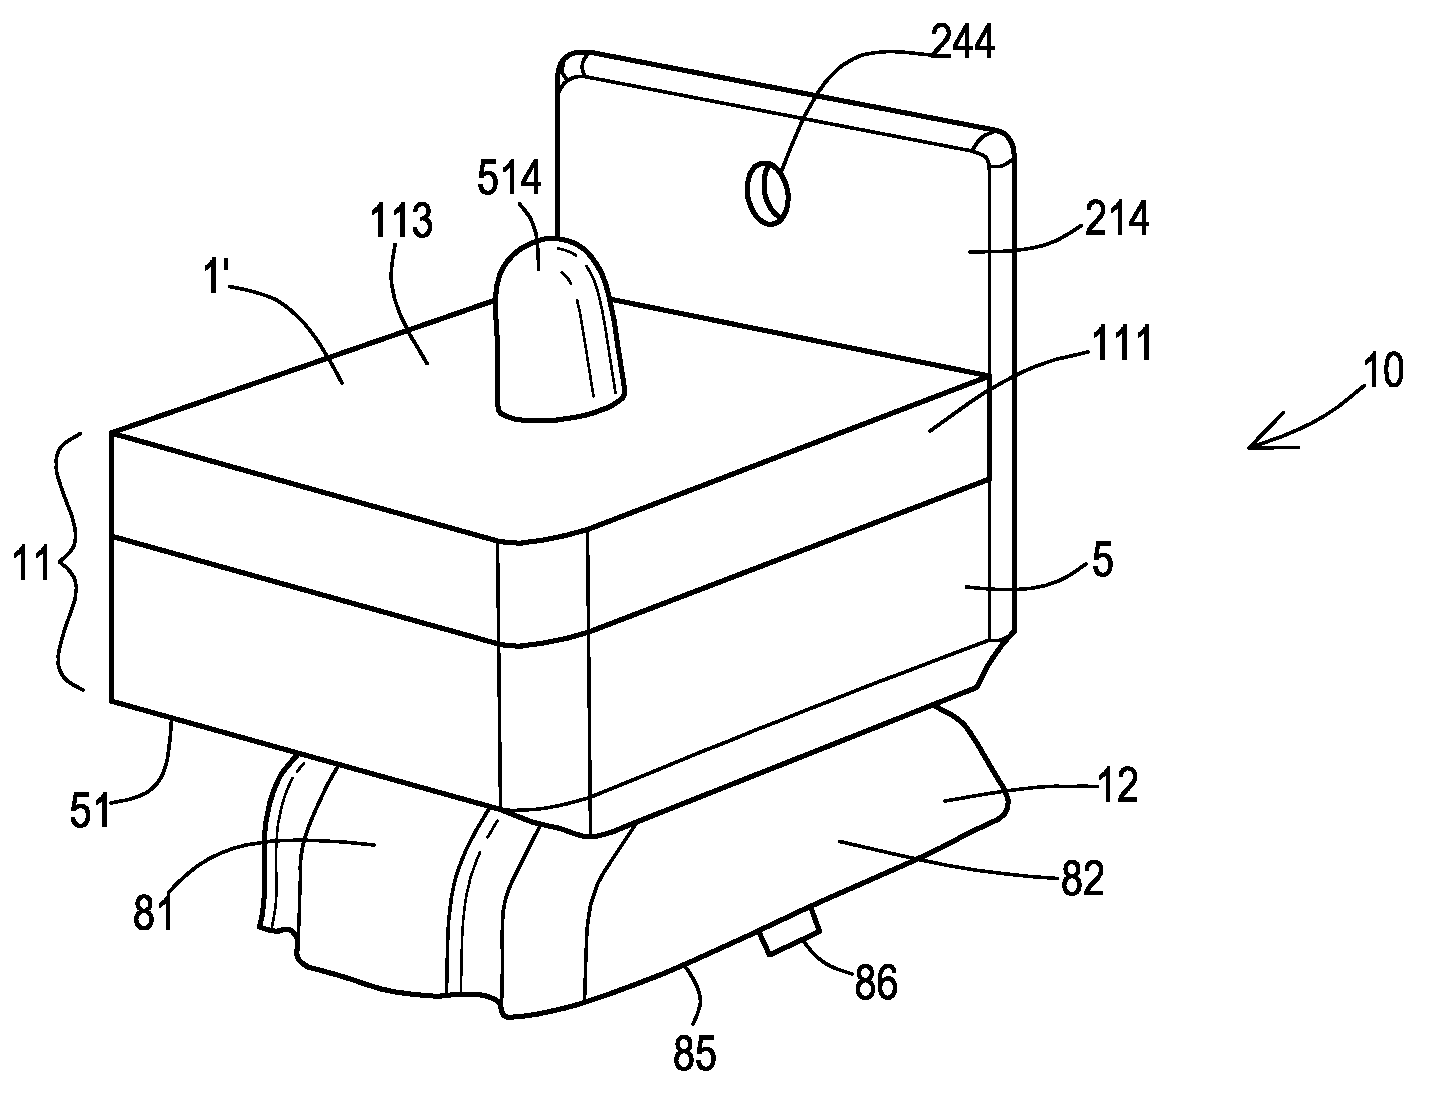 Ankle replacement devices and methods of making and using the same